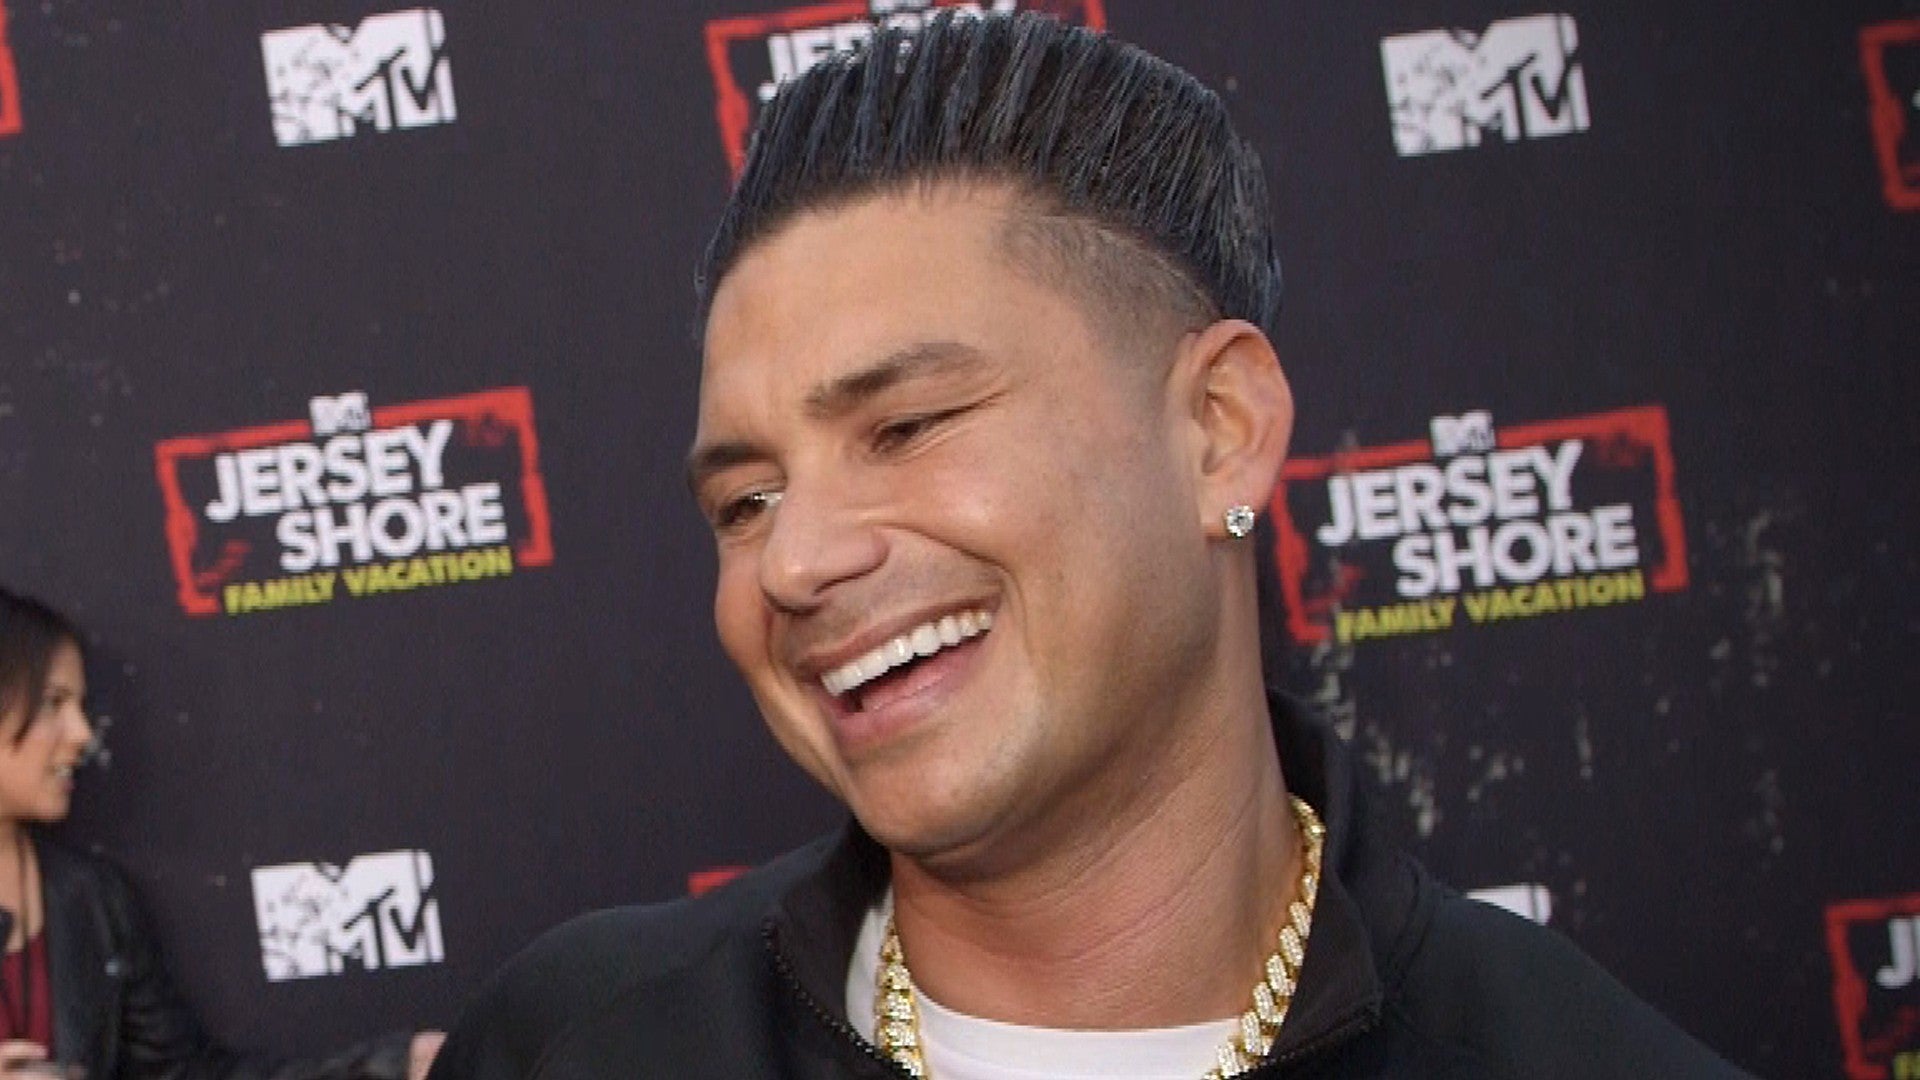 Jersey Shore' Star Pauly D Says Fatherhood Has Made Him 'Even More Picky' When Dating (Exclusive)